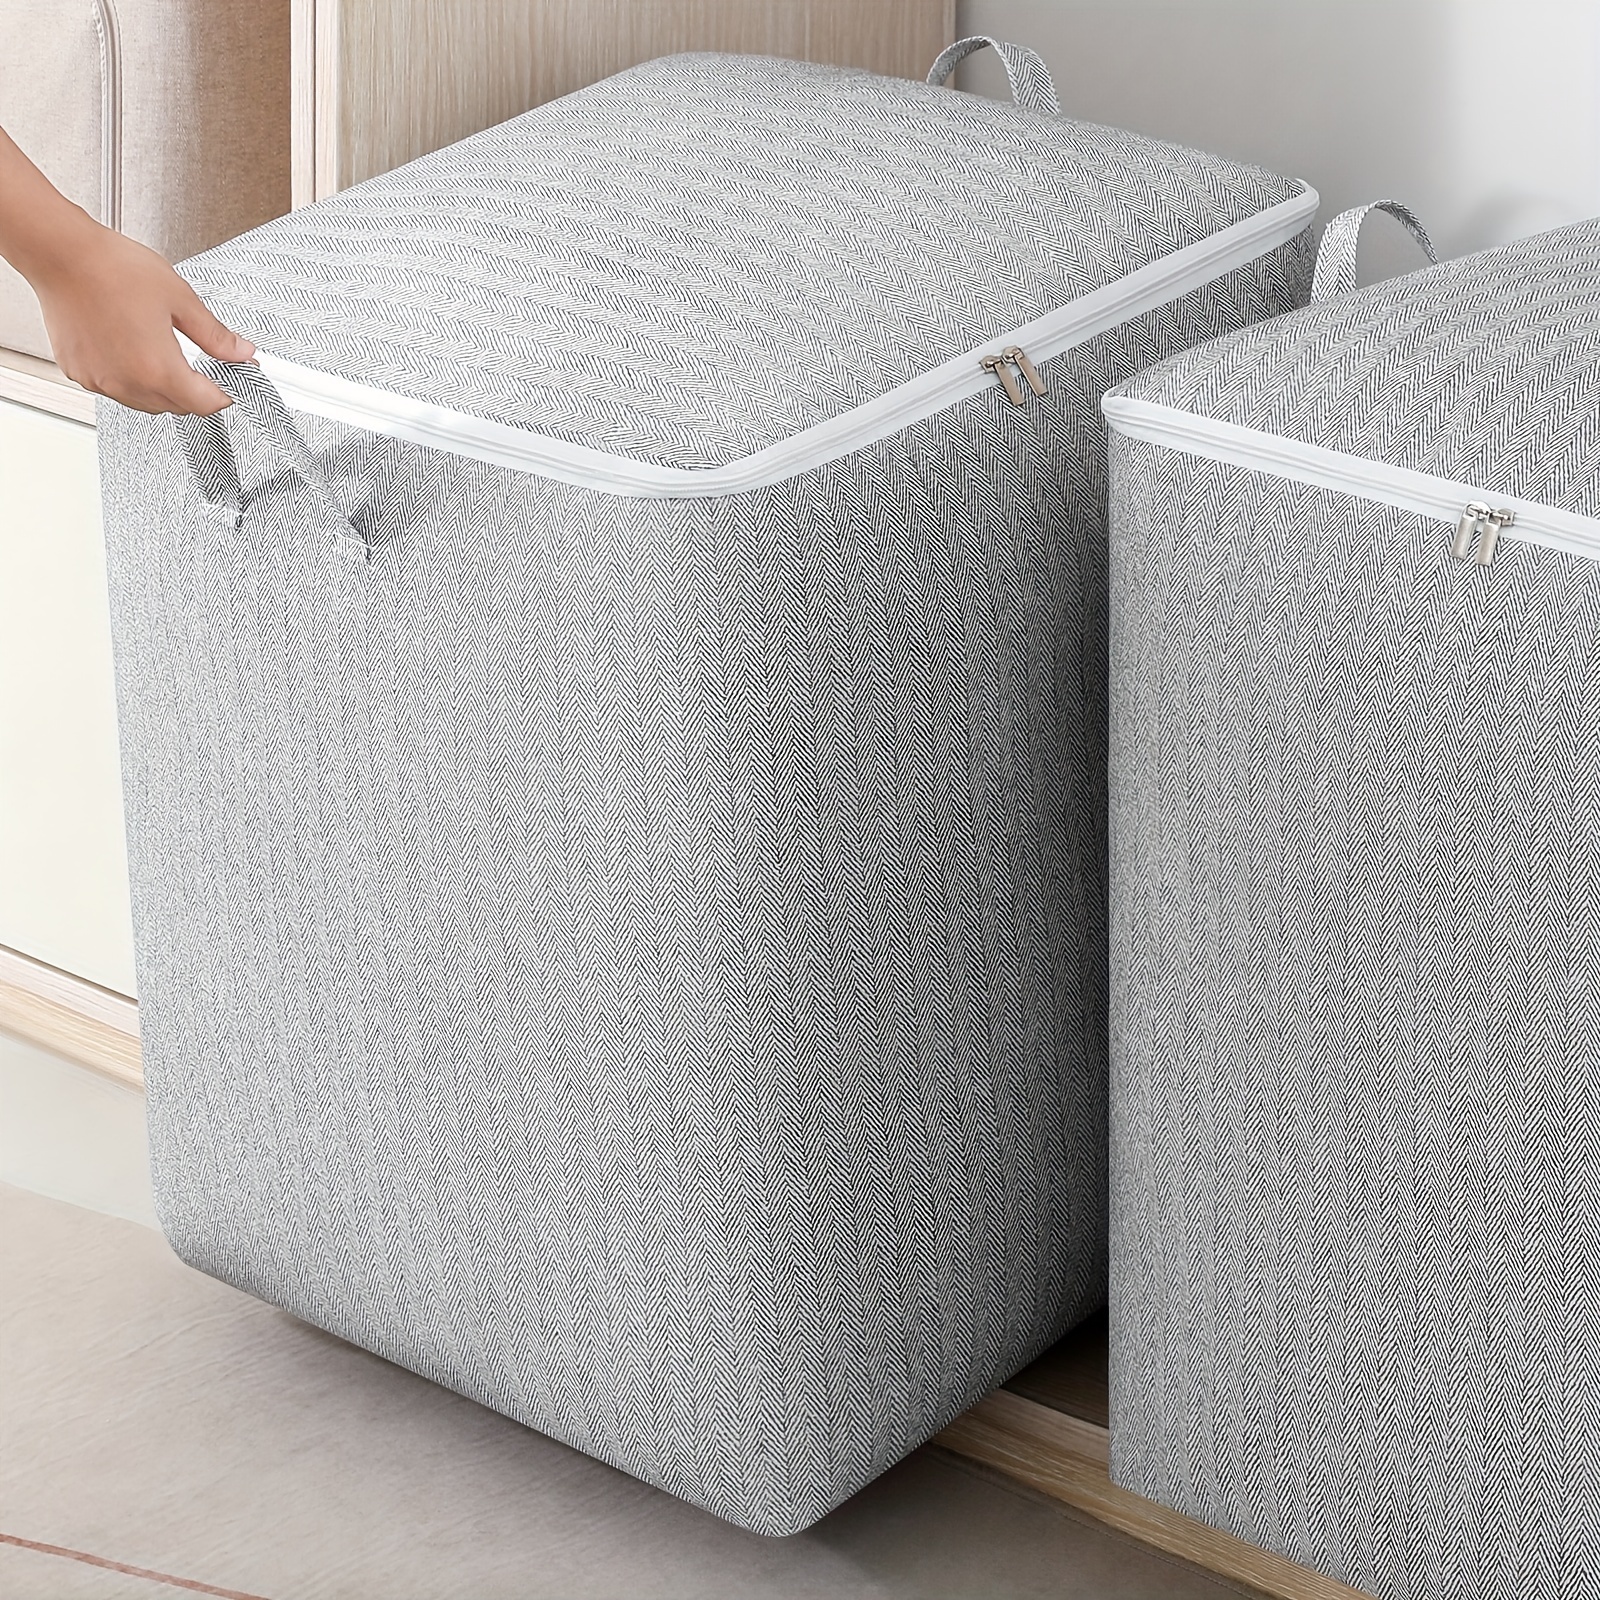 DOKEHOM 17.7-Inches Freestanding Laundry Basket with Lid